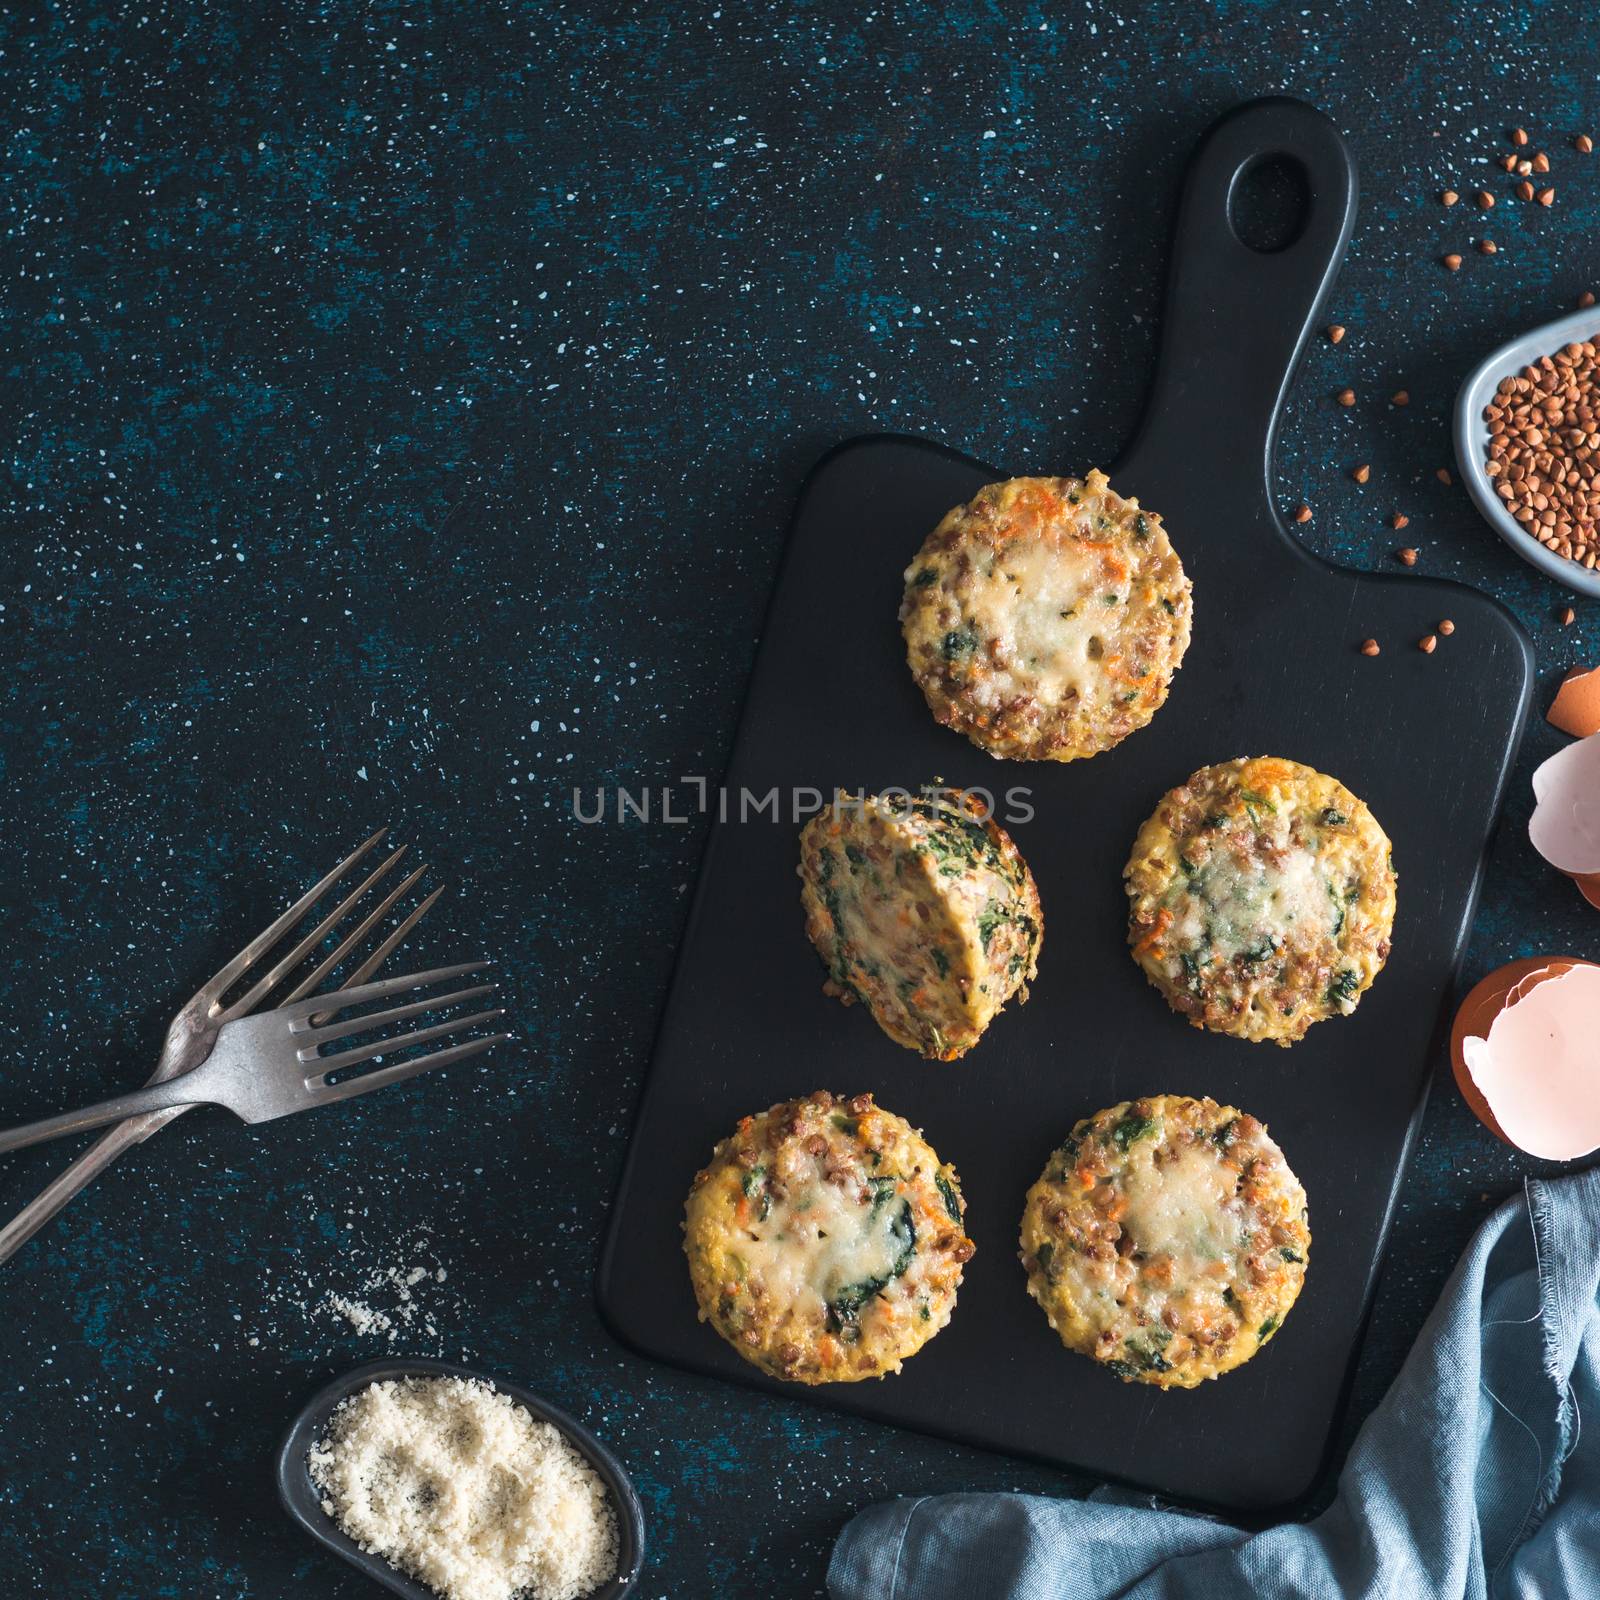 Buckwheat casserole with spinach, carrots, parmesan by fascinadora